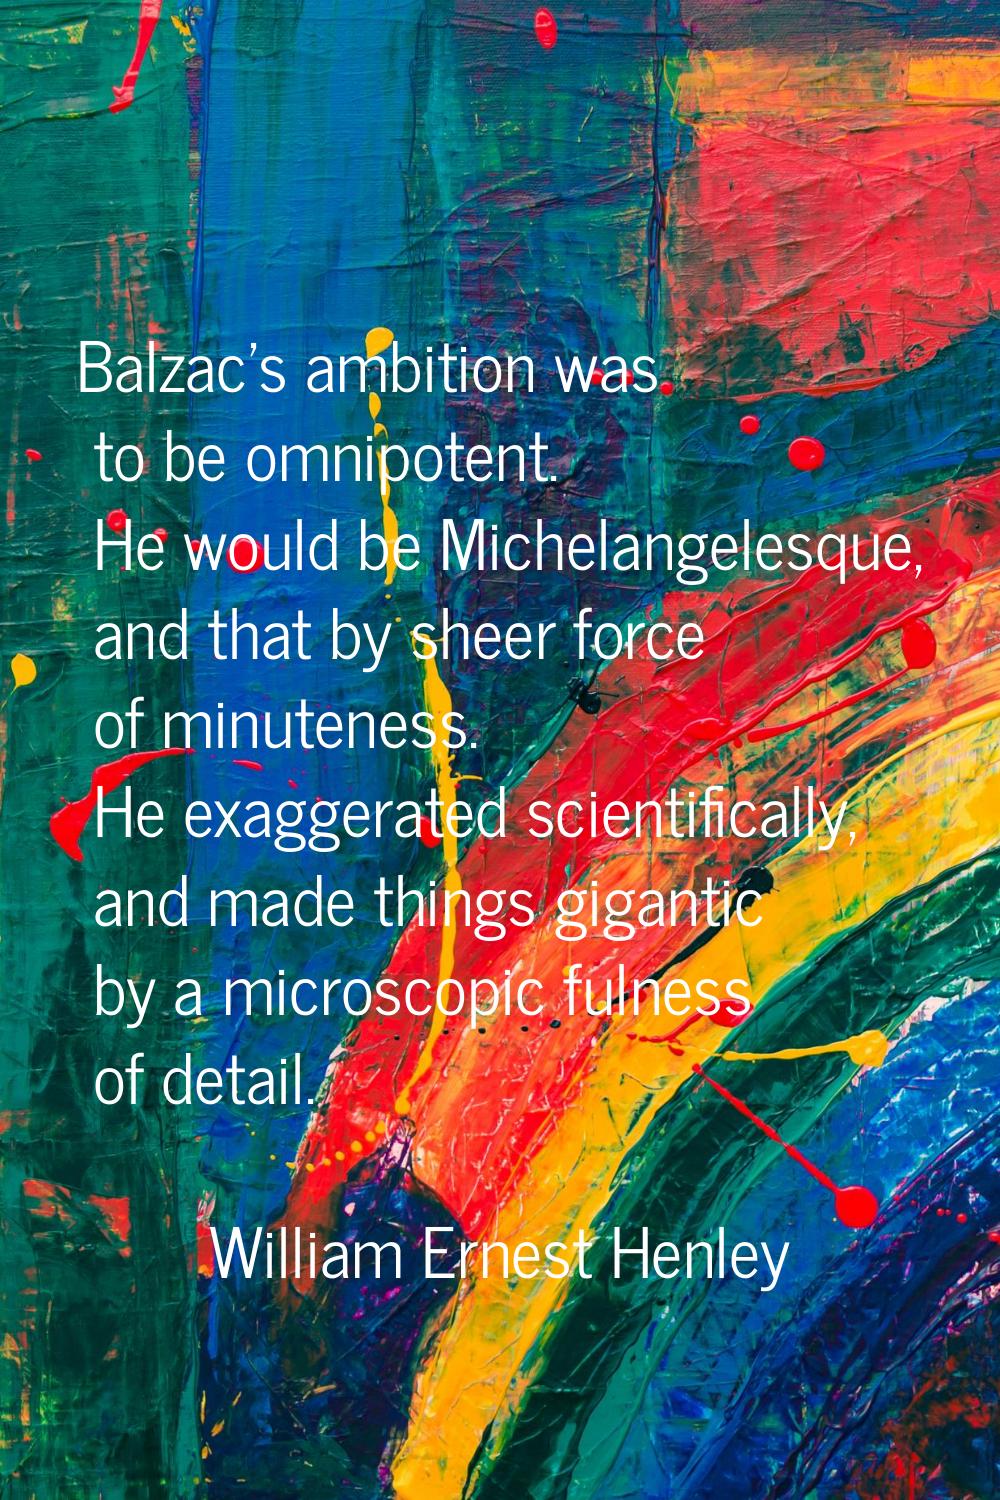 Balzac's ambition was to be omnipotent. He would be Michelangelesque, and that by sheer force of mi